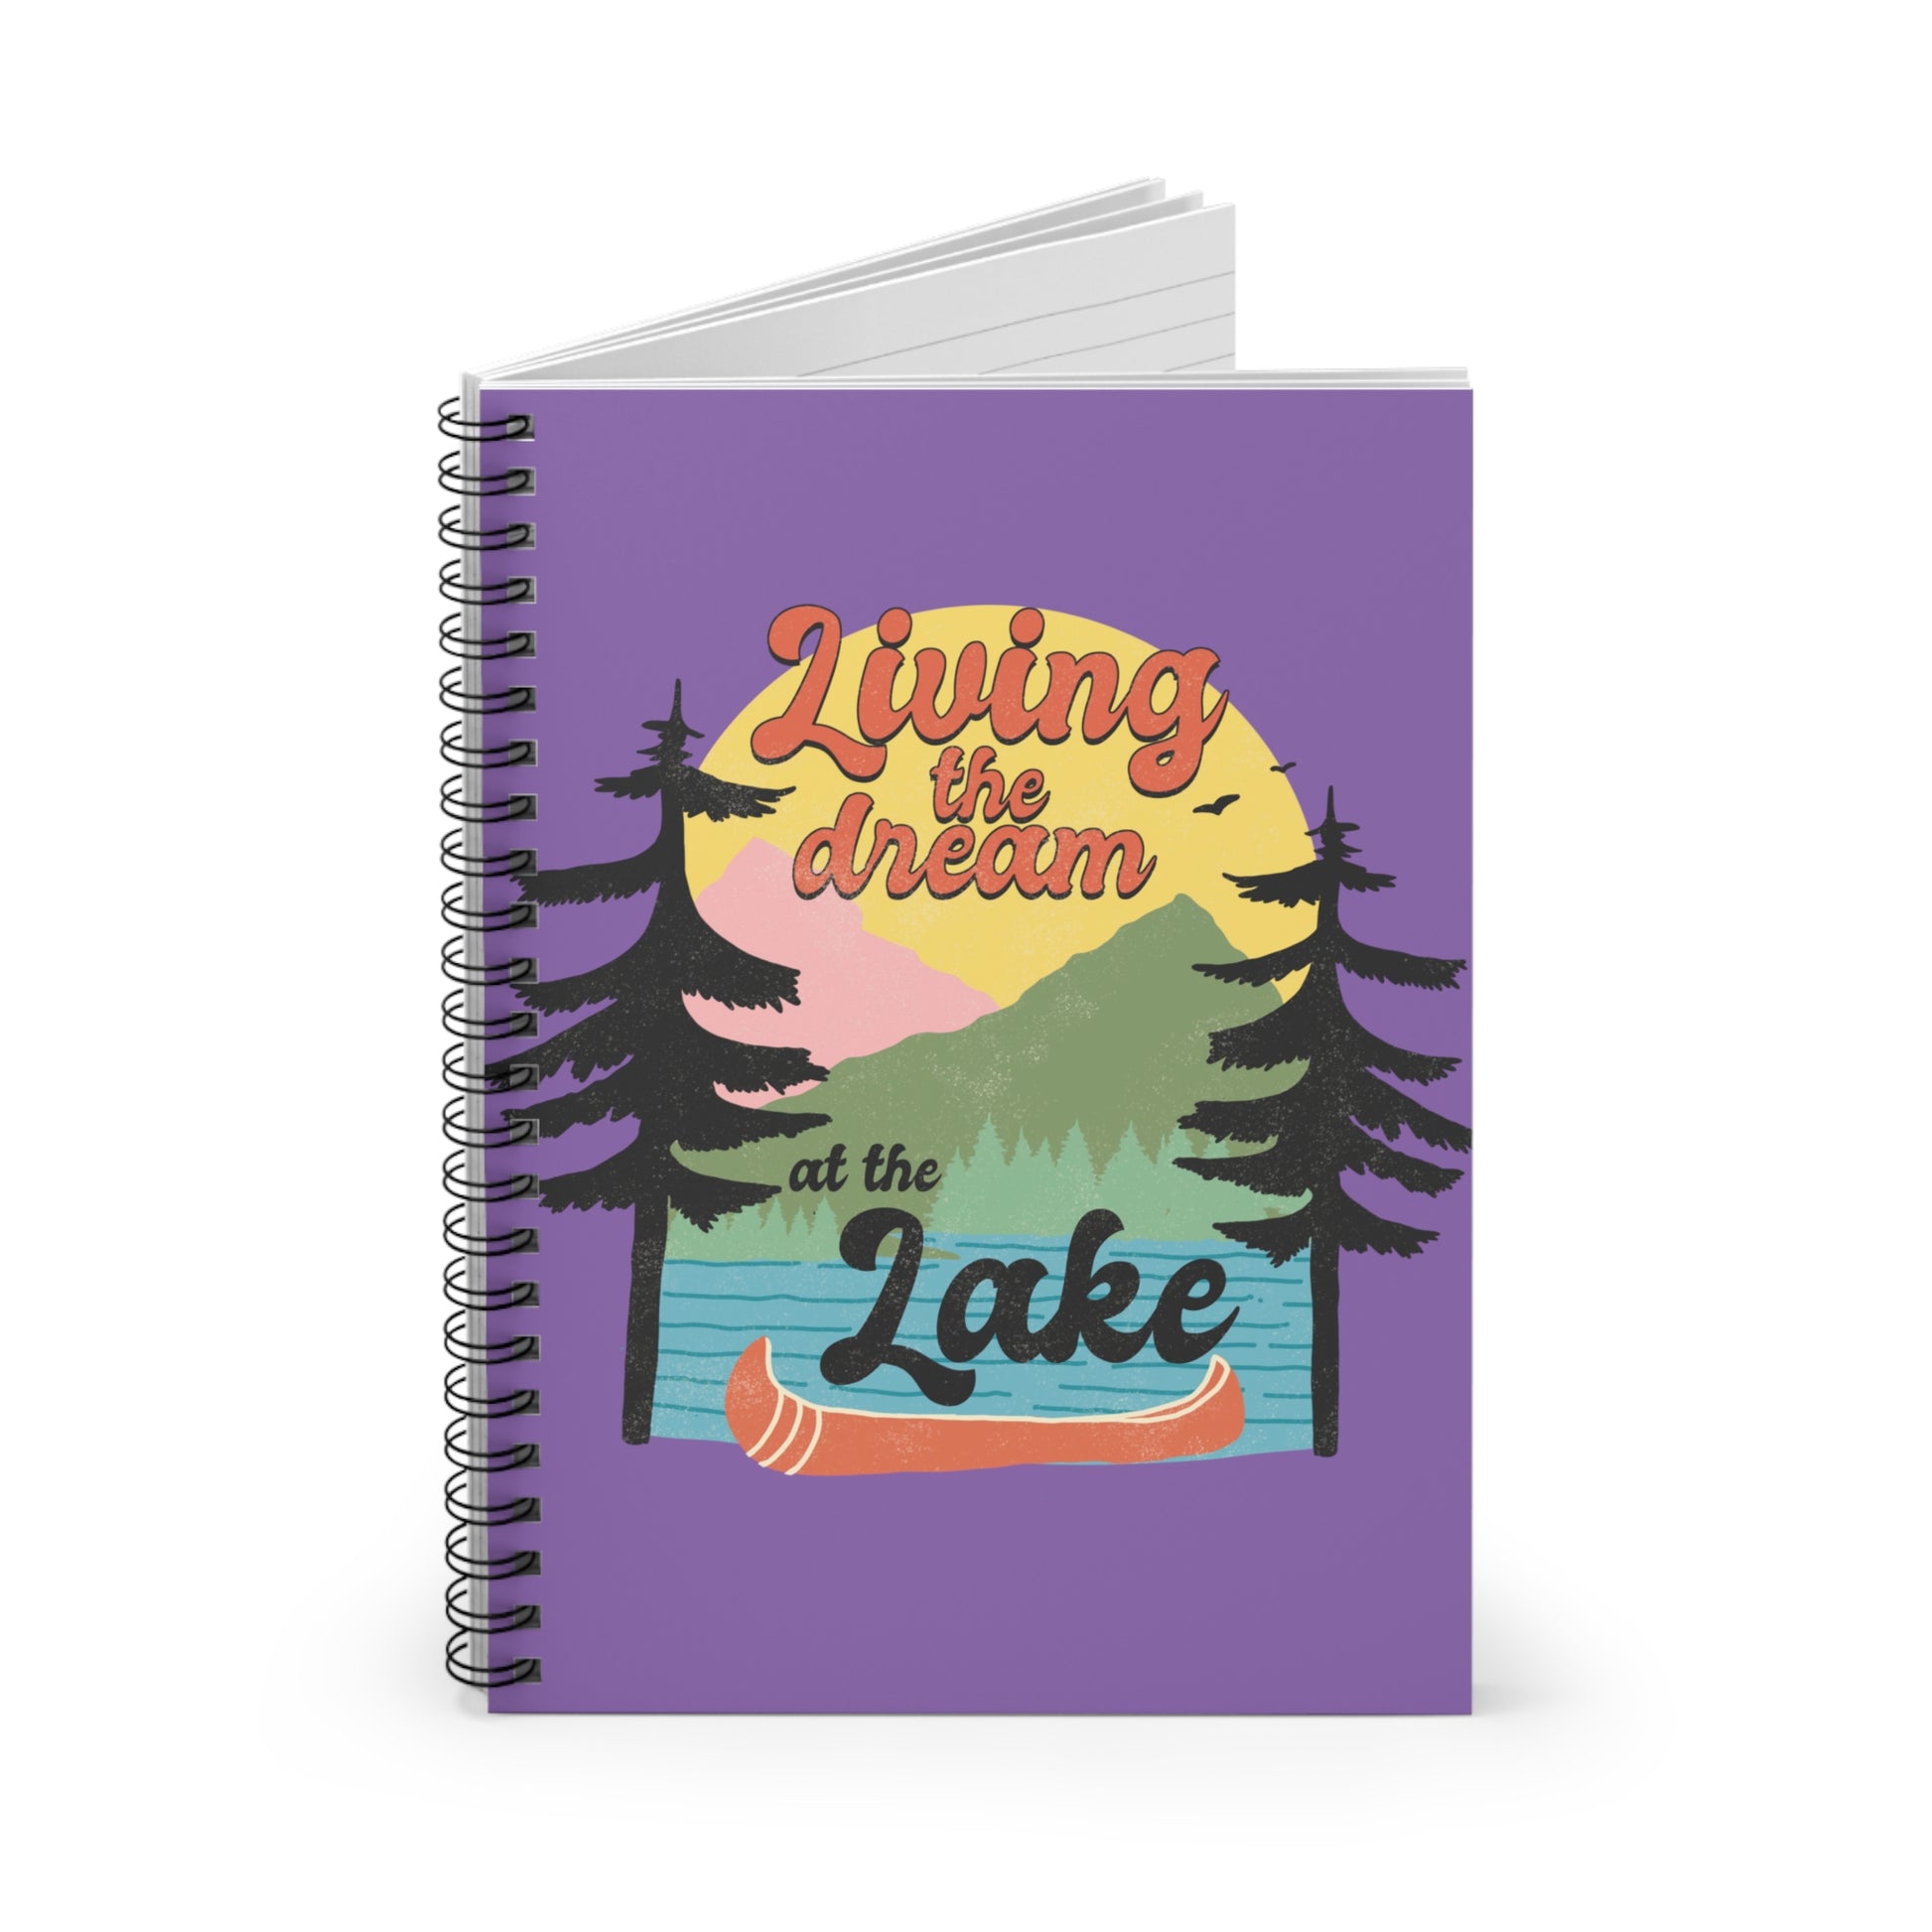 Living the Dream: Spiral Notebook - Log Books - Journals - Diaries - and More Custom Printed by TheGlassyLass